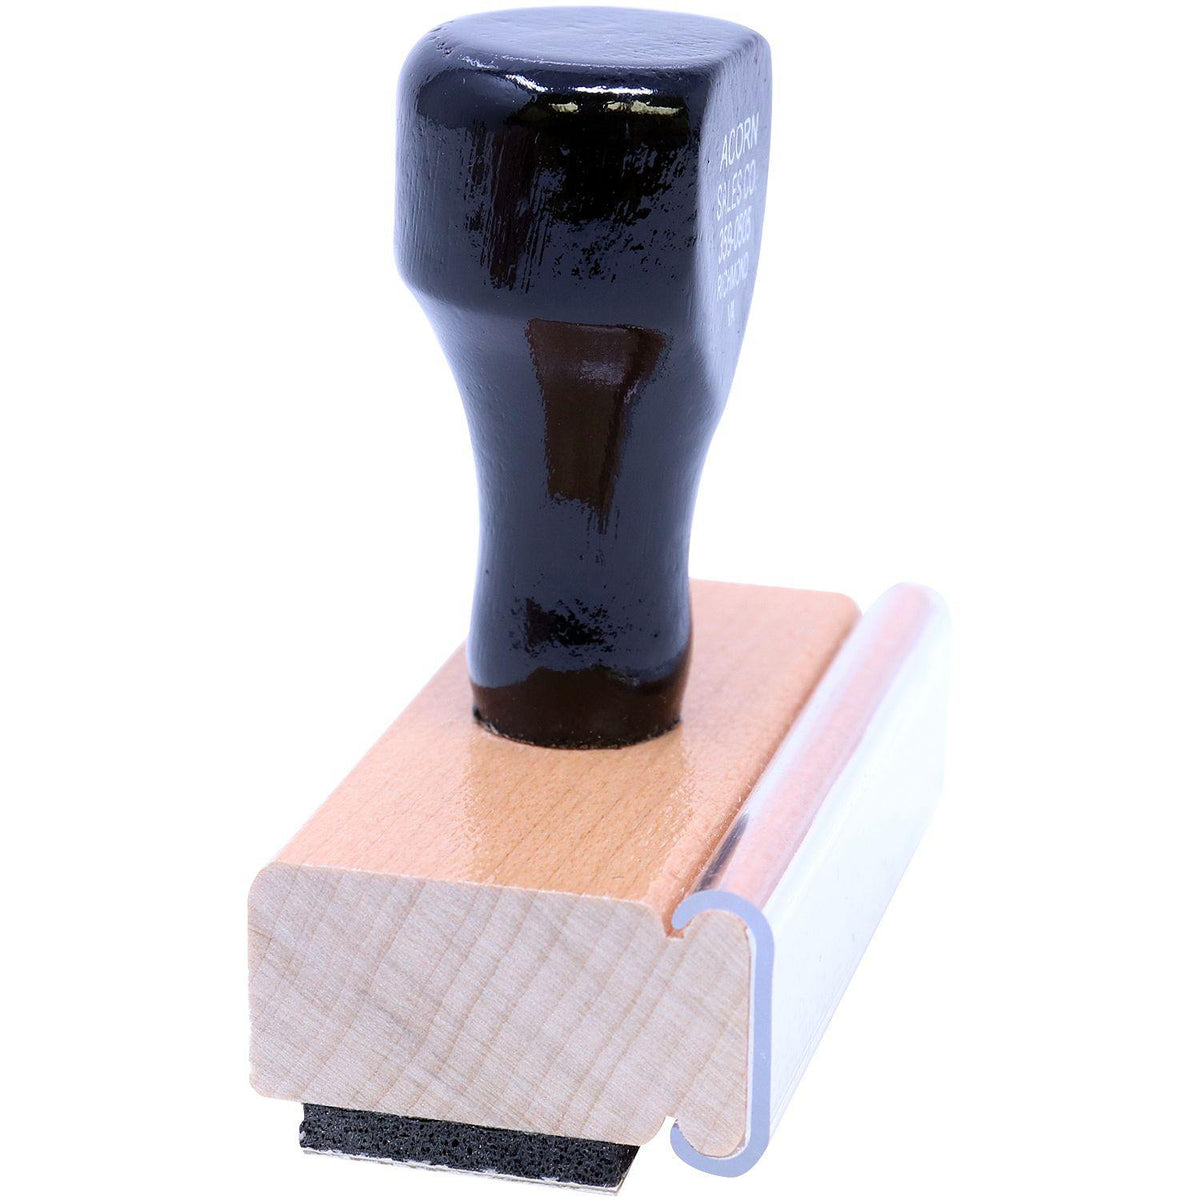 Side View of Large Postage Due Rubber Stamp at an Angle